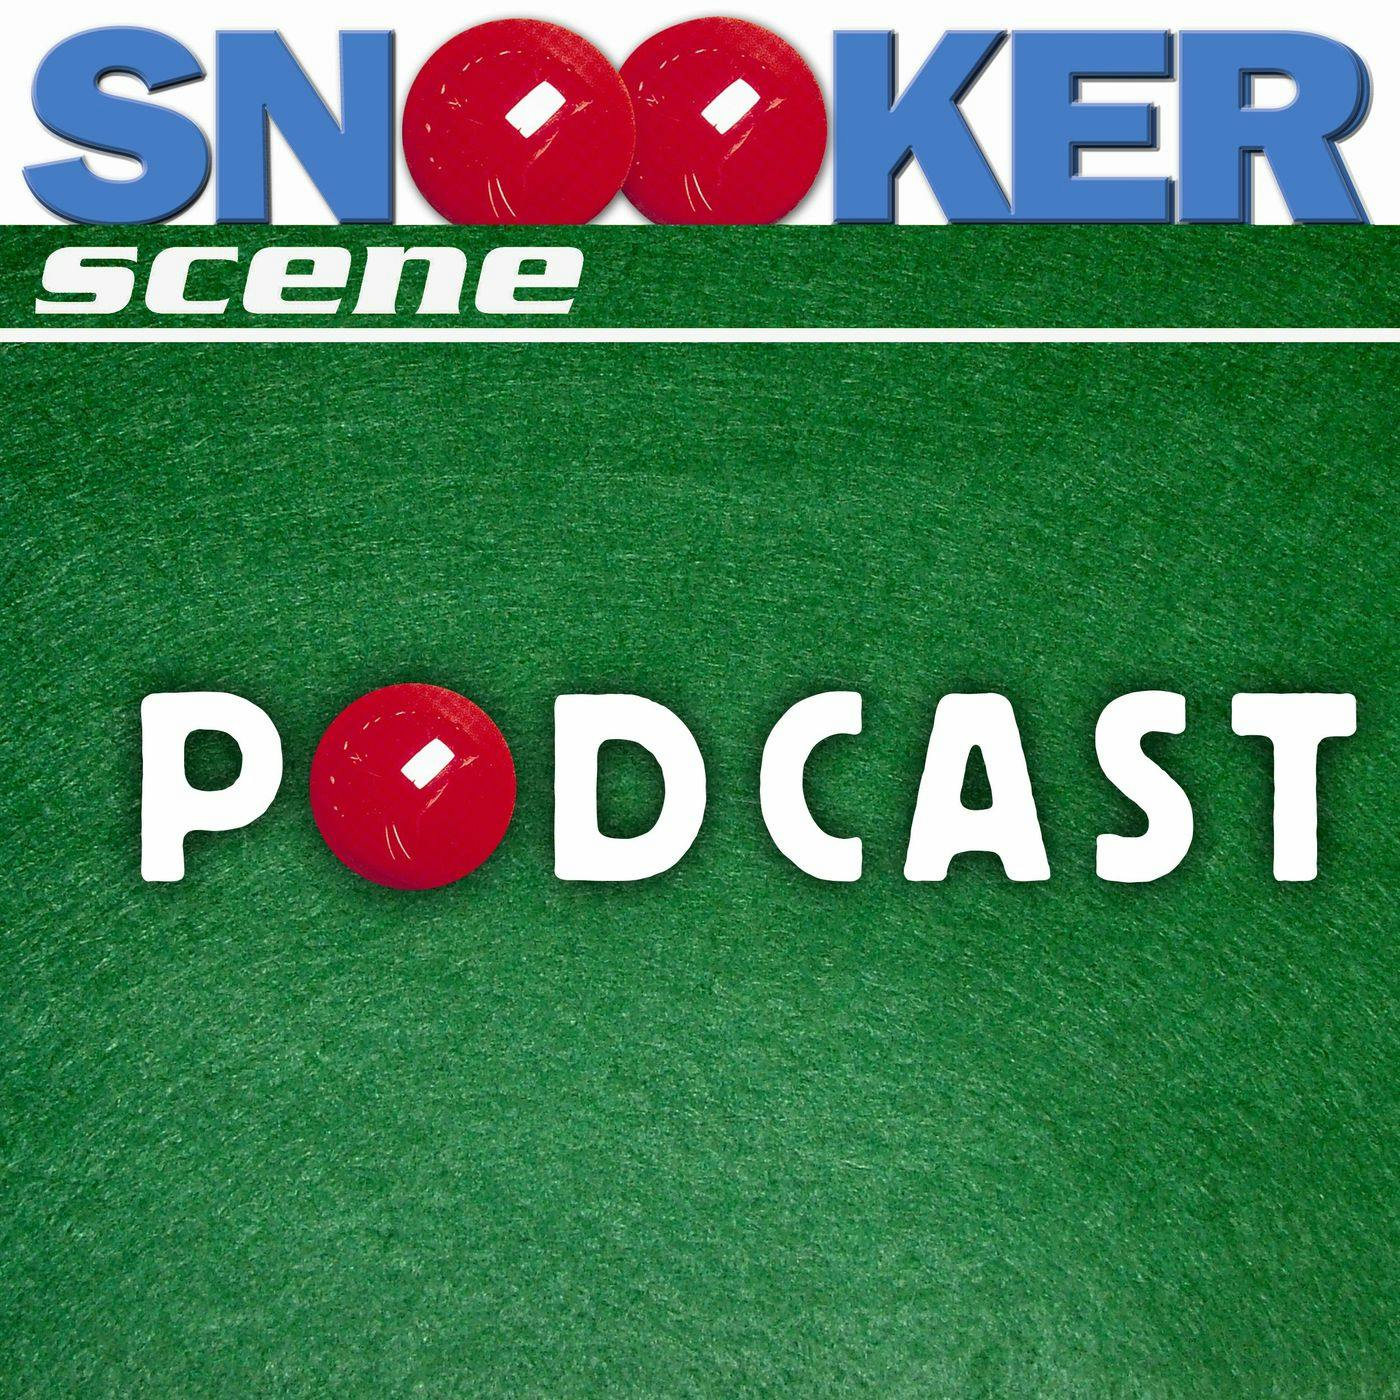 Snooker Scene Podcast episode 76 - A bluffer’s guide to the UK Championship